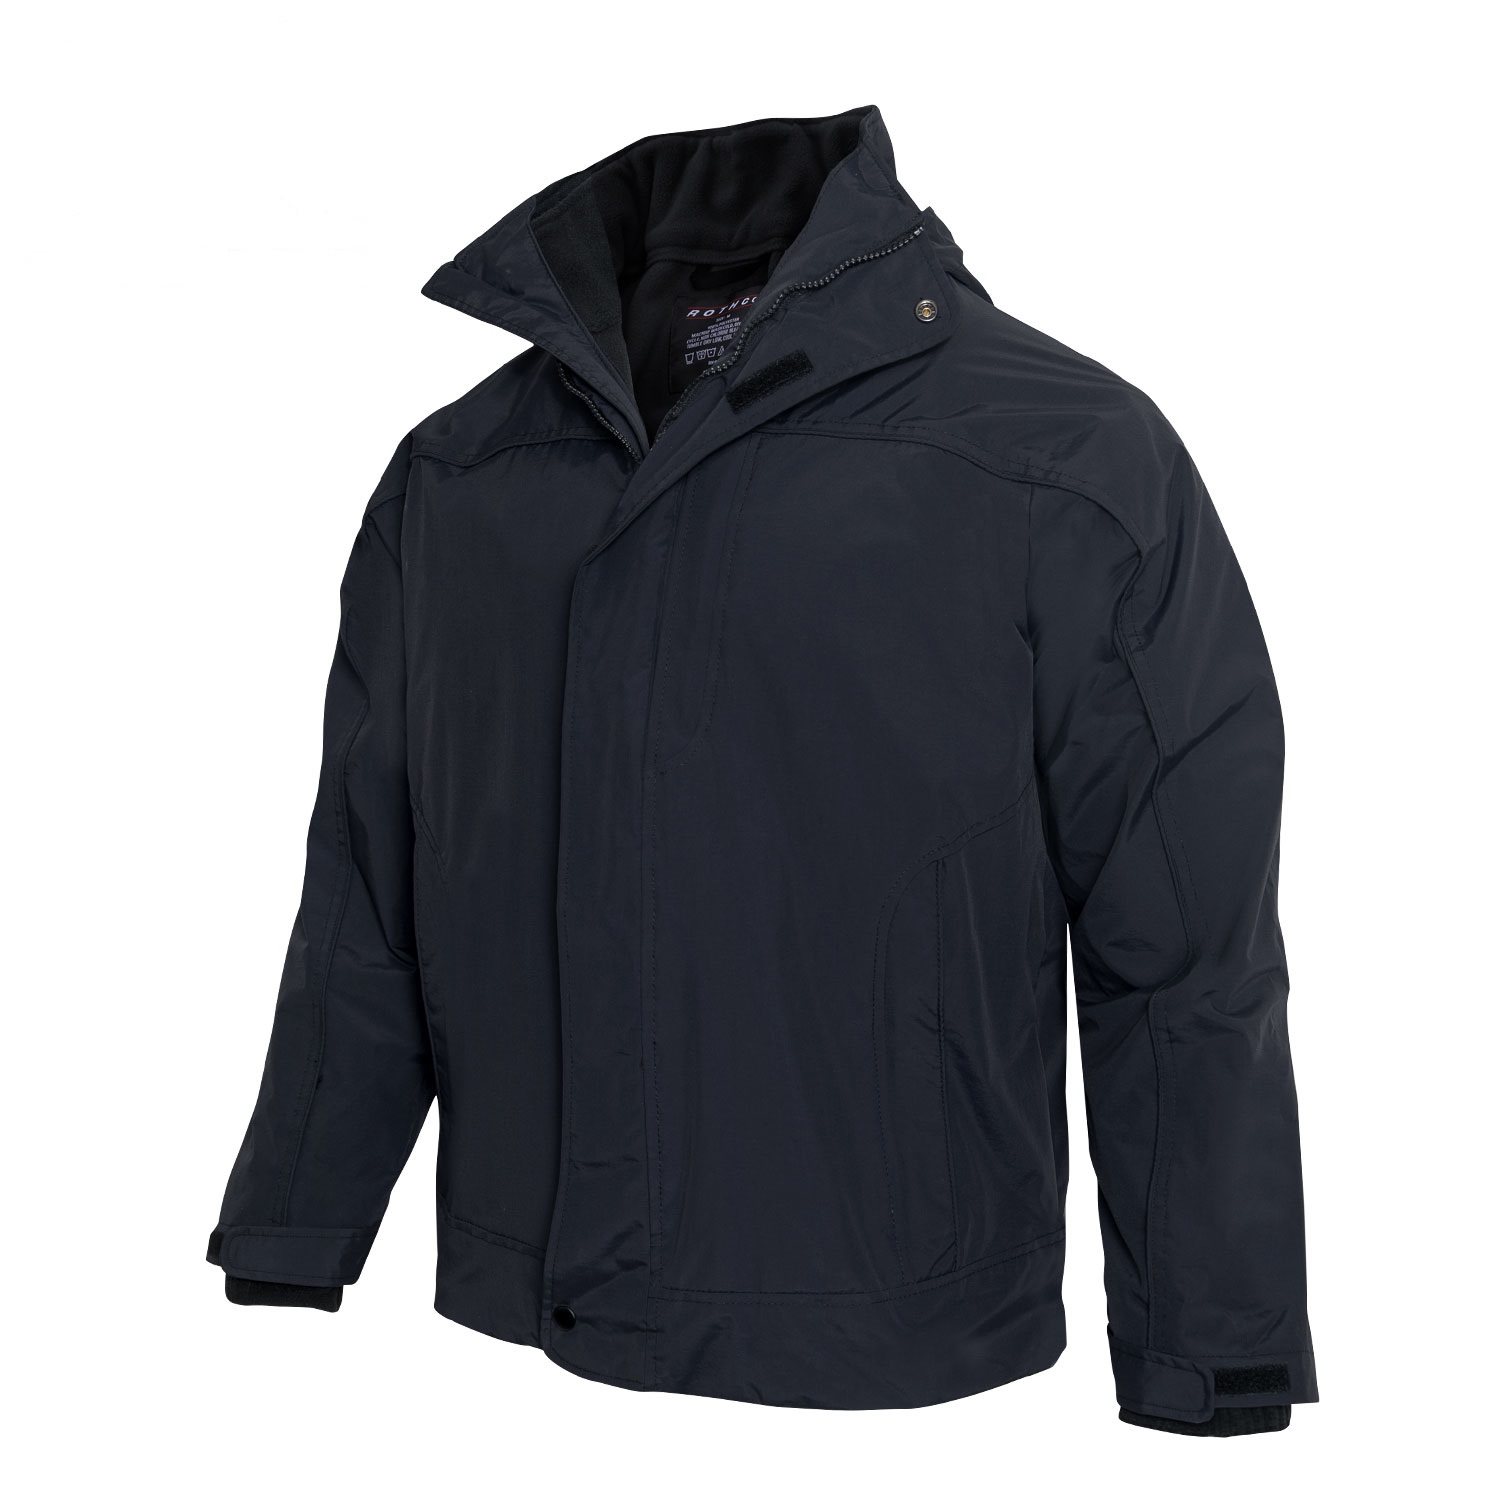 Jacke ALL WEATHER 3in1 MIDNIGHT NAVY BLUE ROTHCO 1857 L-11